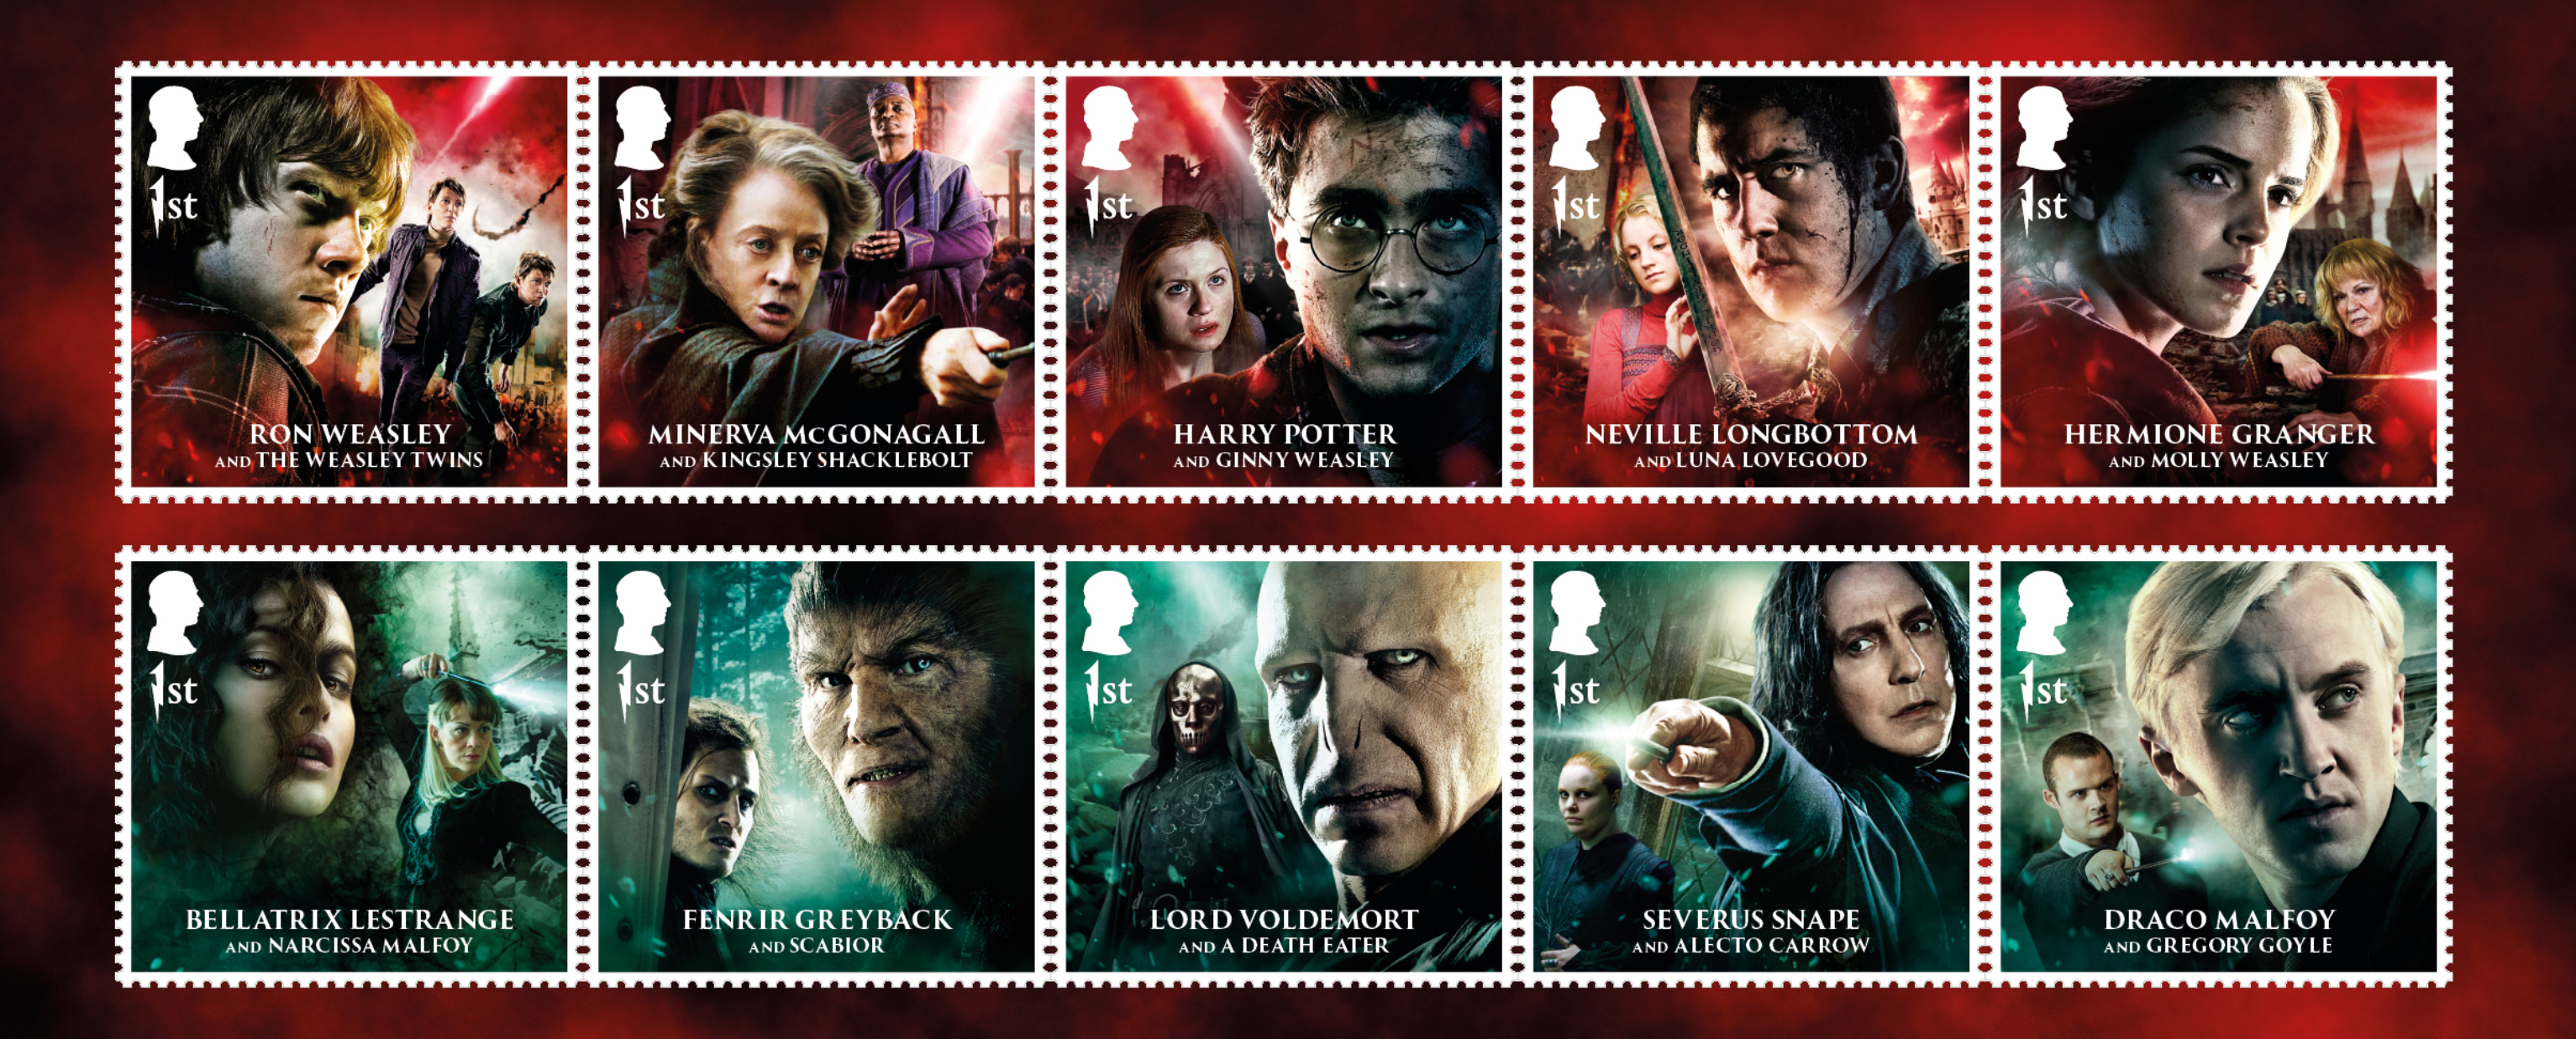 Harry Potter: Royal Mail to Release Harry Potter Commemorative